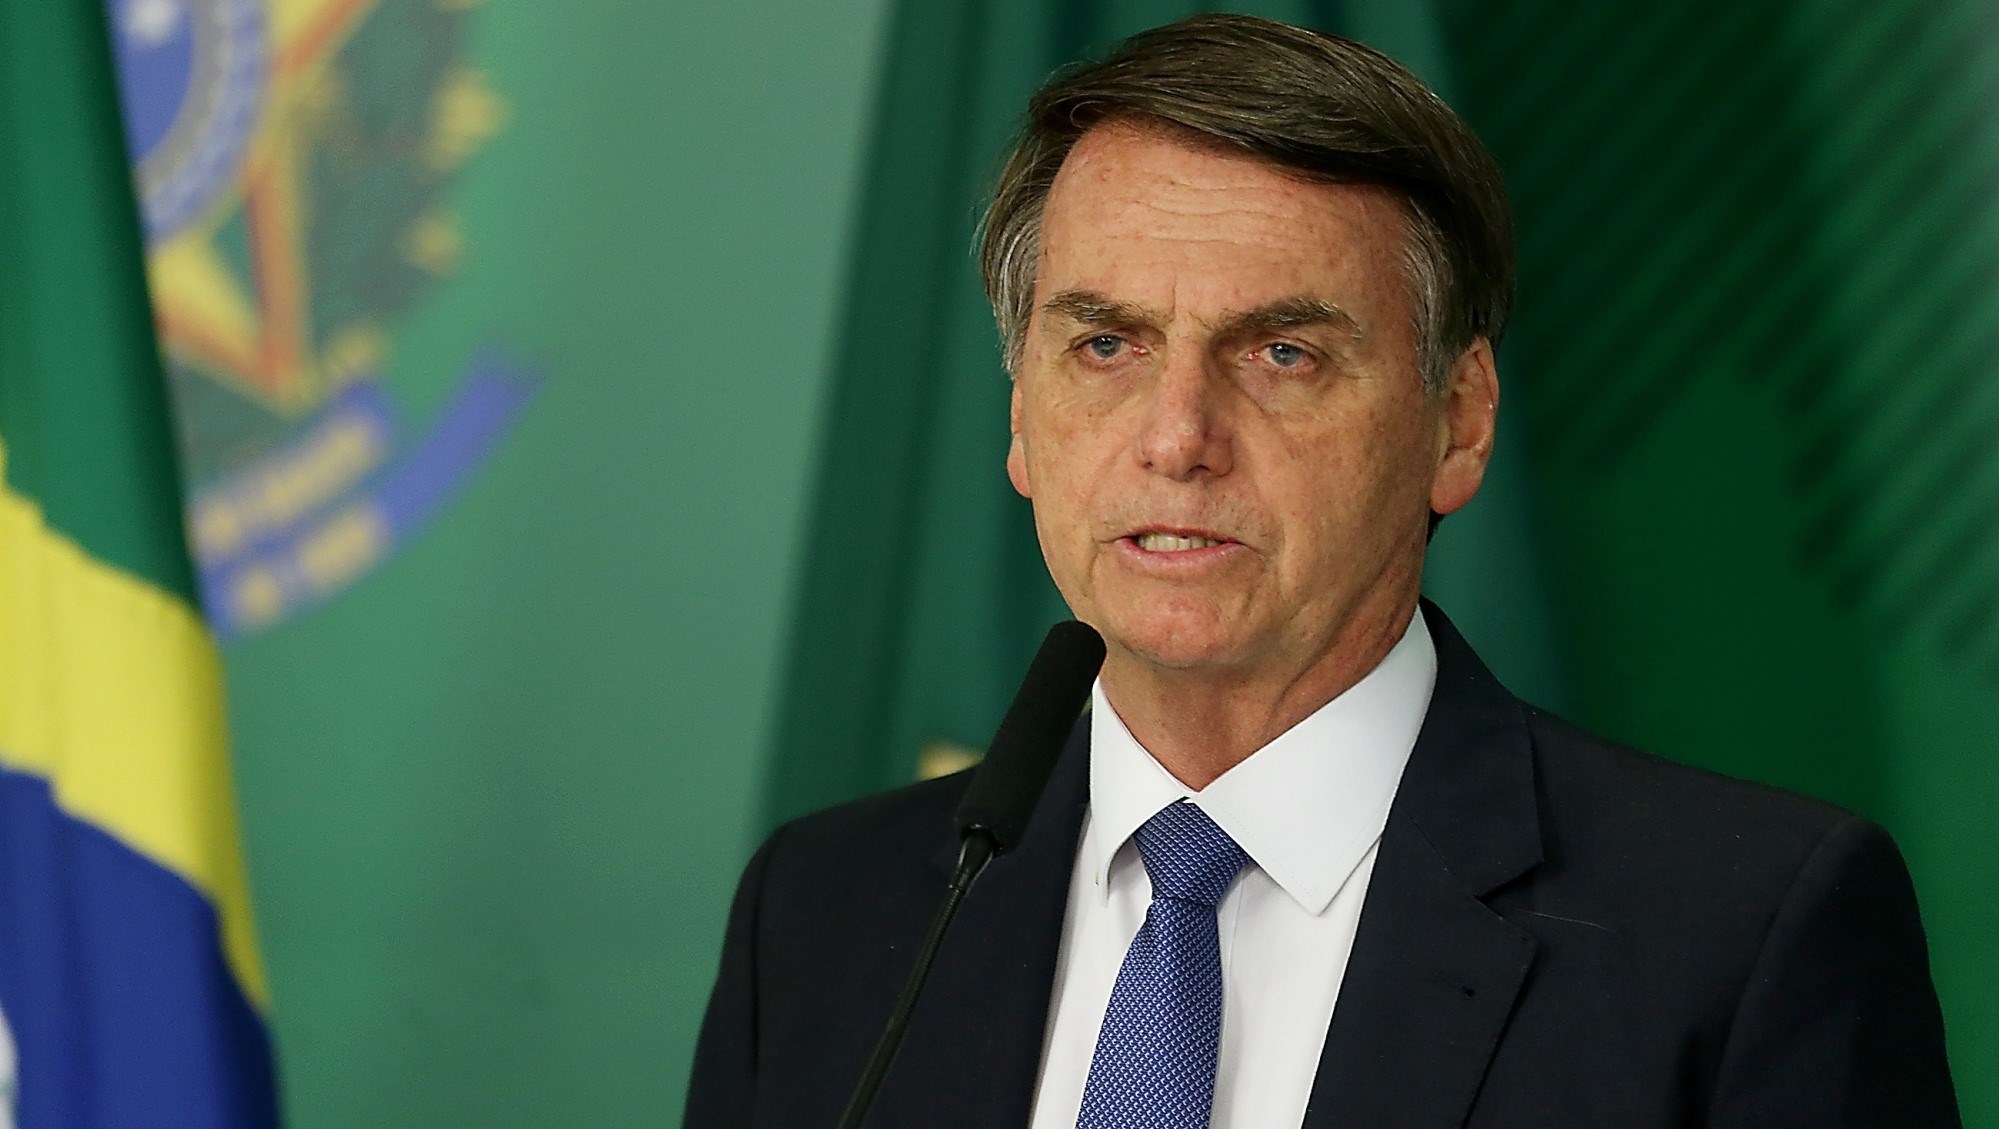 World News Roundup: Brazil's Bolsonaro indicted for suspected fraud on vaccine records; Canada's parliament passes vote after language on Palestinian statehood dropped and more | Politics